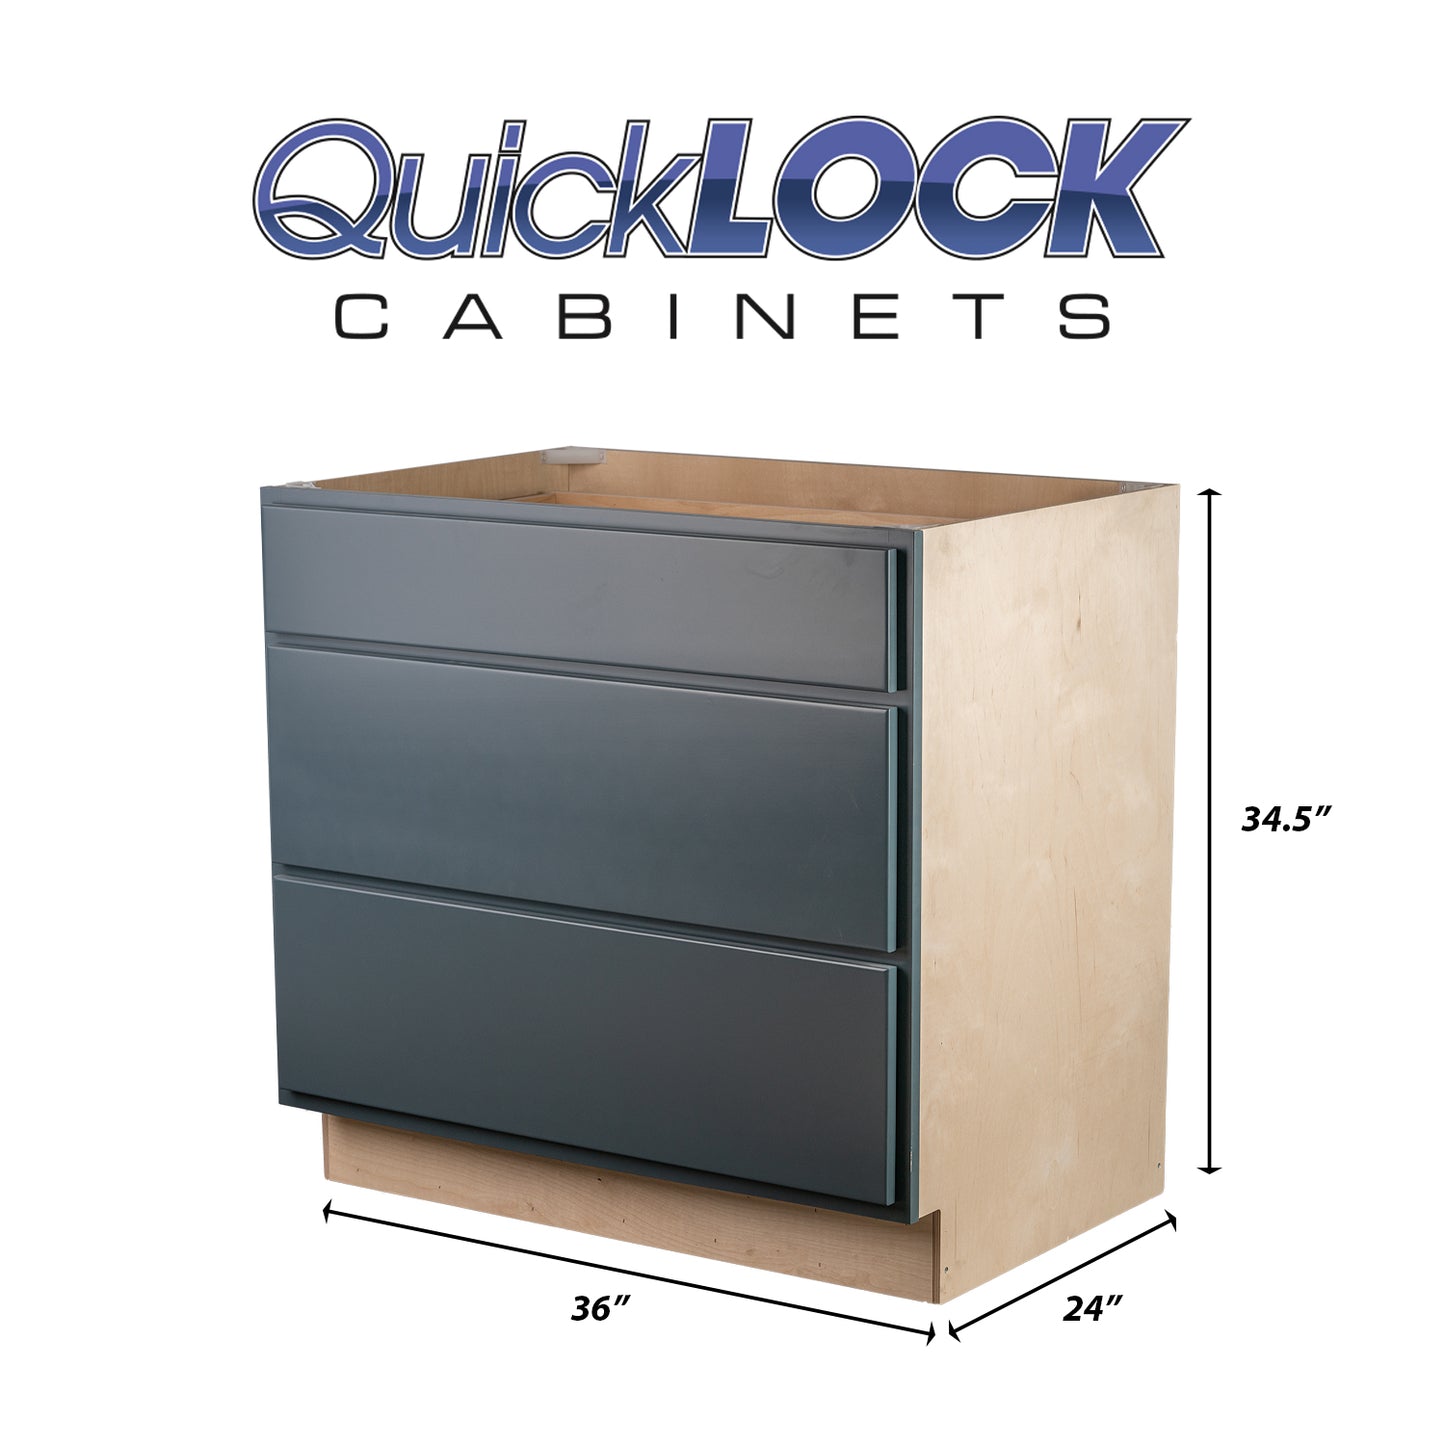 Quicklock RTA (Ready-to-Assemble) Needlepoint Navy 3 Drawer 36" Pots and Pans Base Cabinet | 36"Wx34.5"Hx24"D